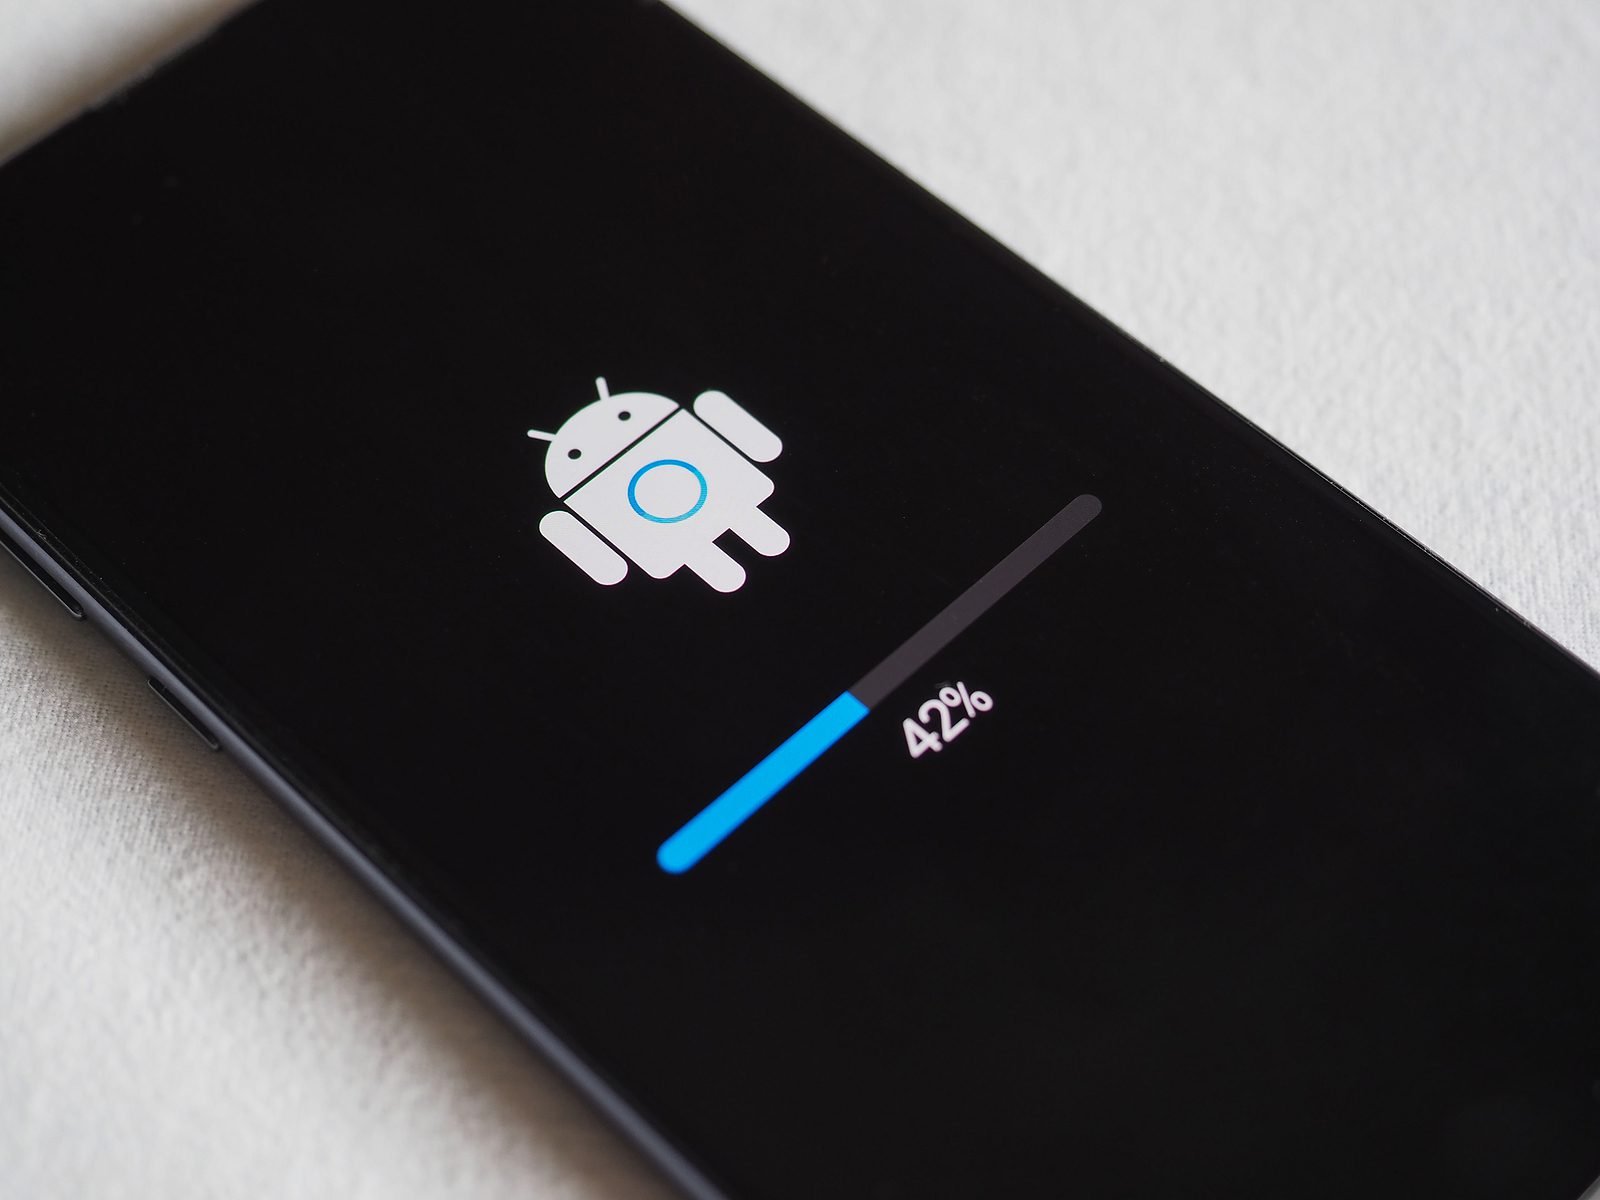 Android Security Update Patches Kernel Vulnerability Exploited by Spyware Vendor – Source: www.securityweek.com